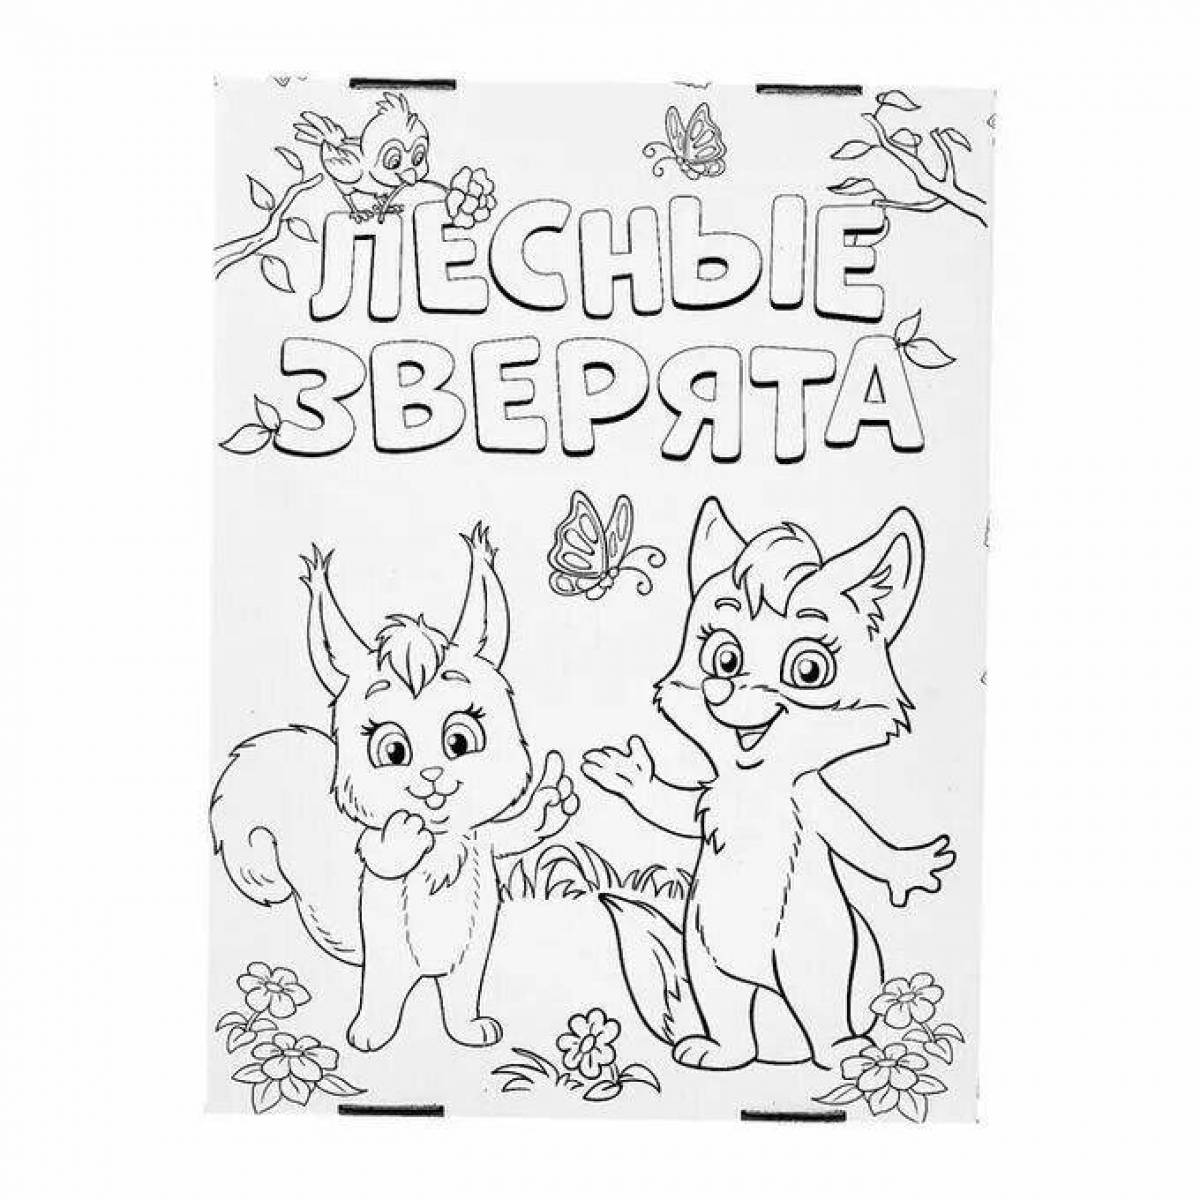 Creative coloring page cover